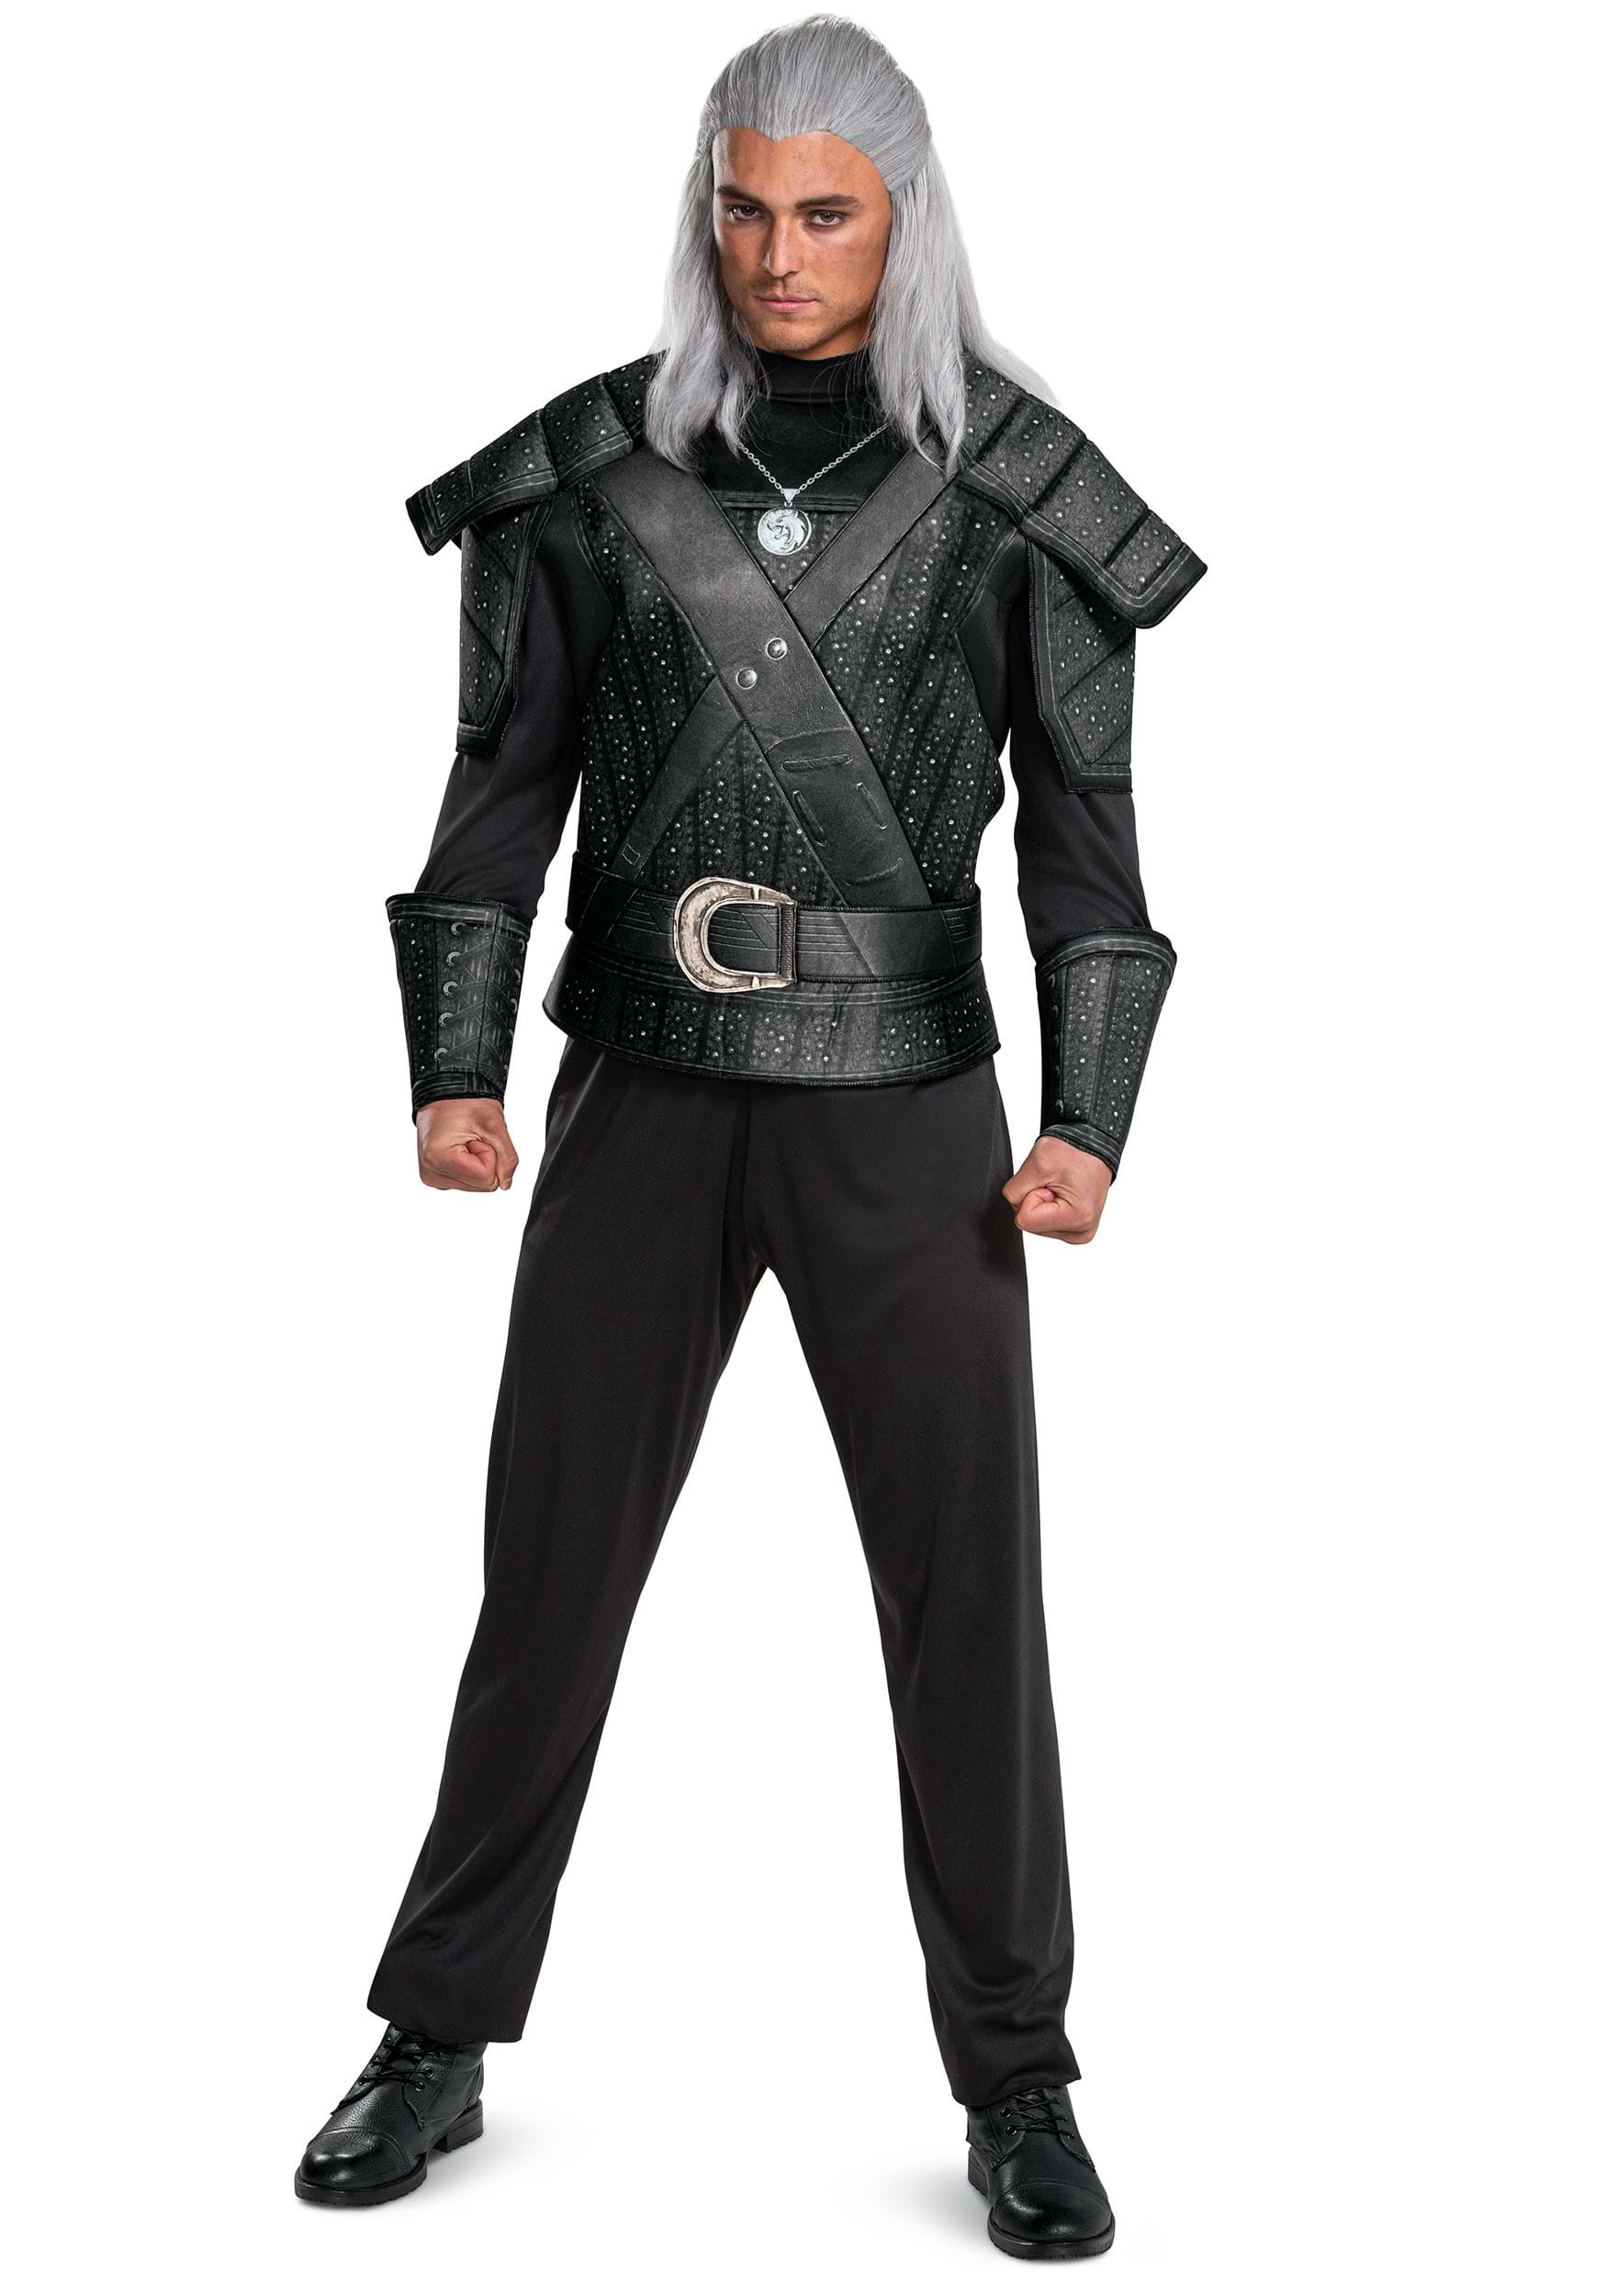 Photos - Fancy Dress Classic Disguise The Witcher  Geralt Costume for Men Black/Gray DI12382 